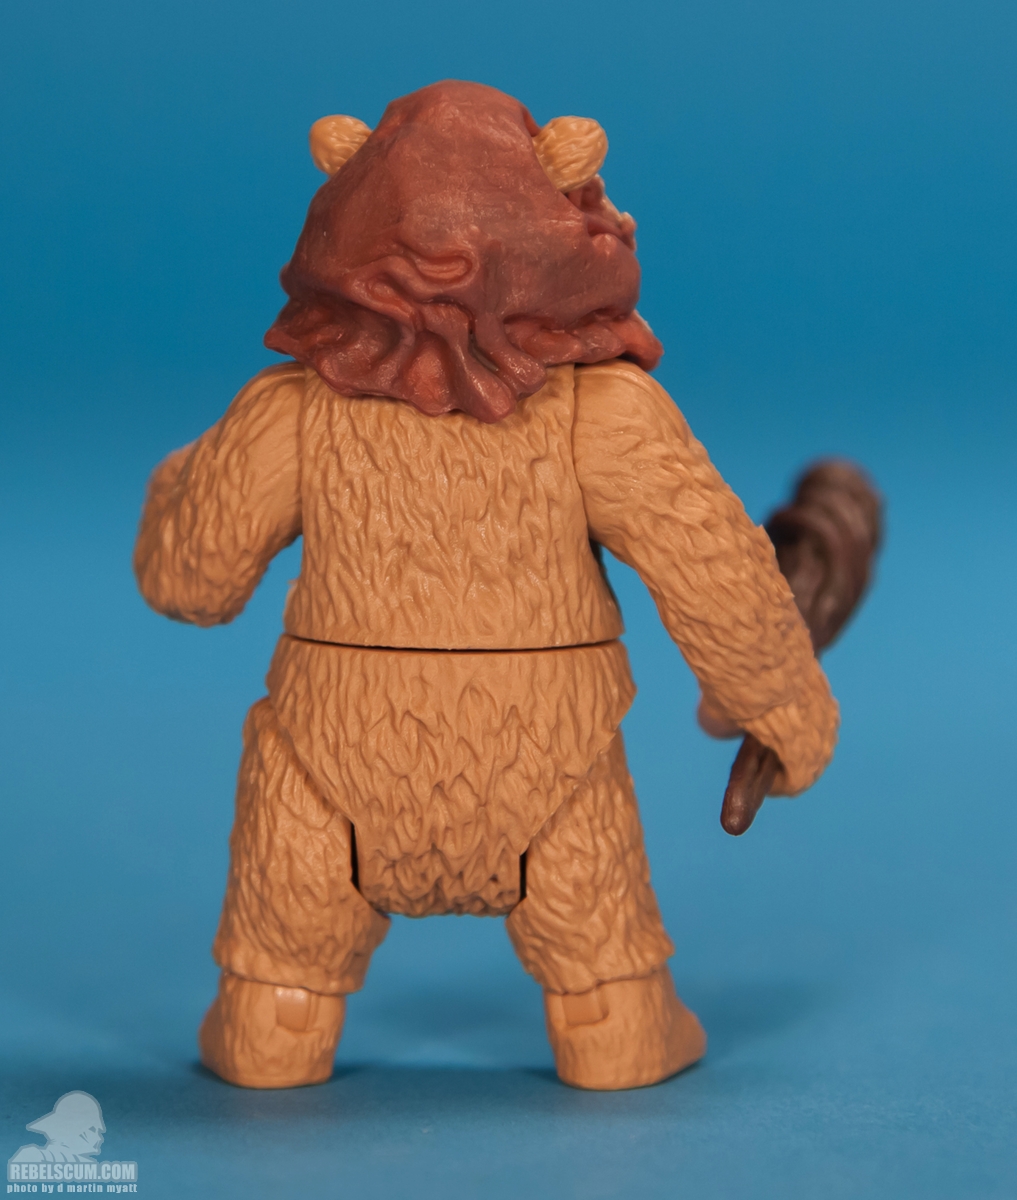 Ewok_Scouts_The_Vintage_Collection_TVC_Kmart-08.jpg